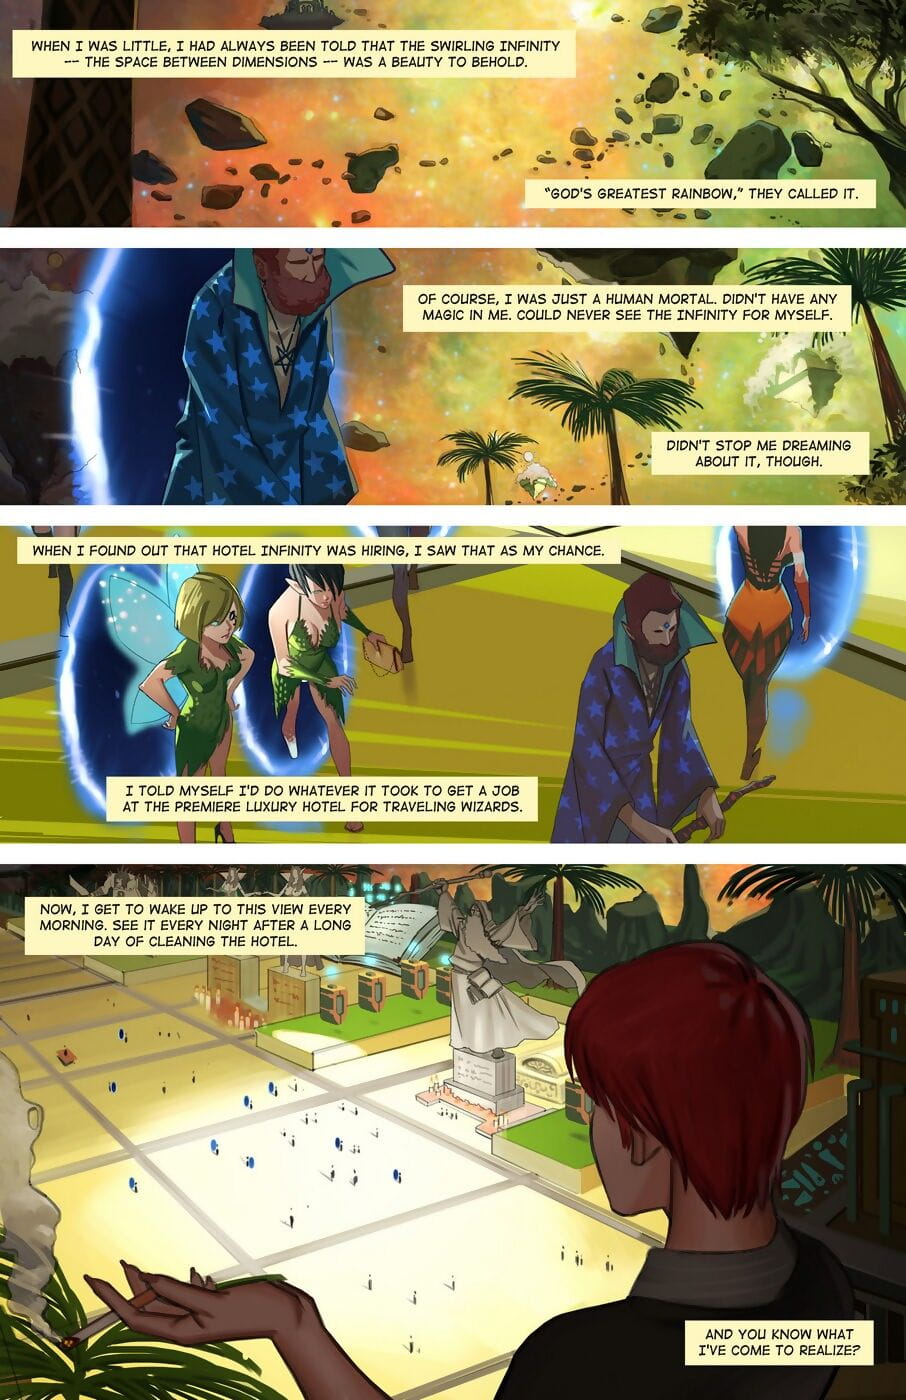 ExpansionFan- Hotel Infinity page 1